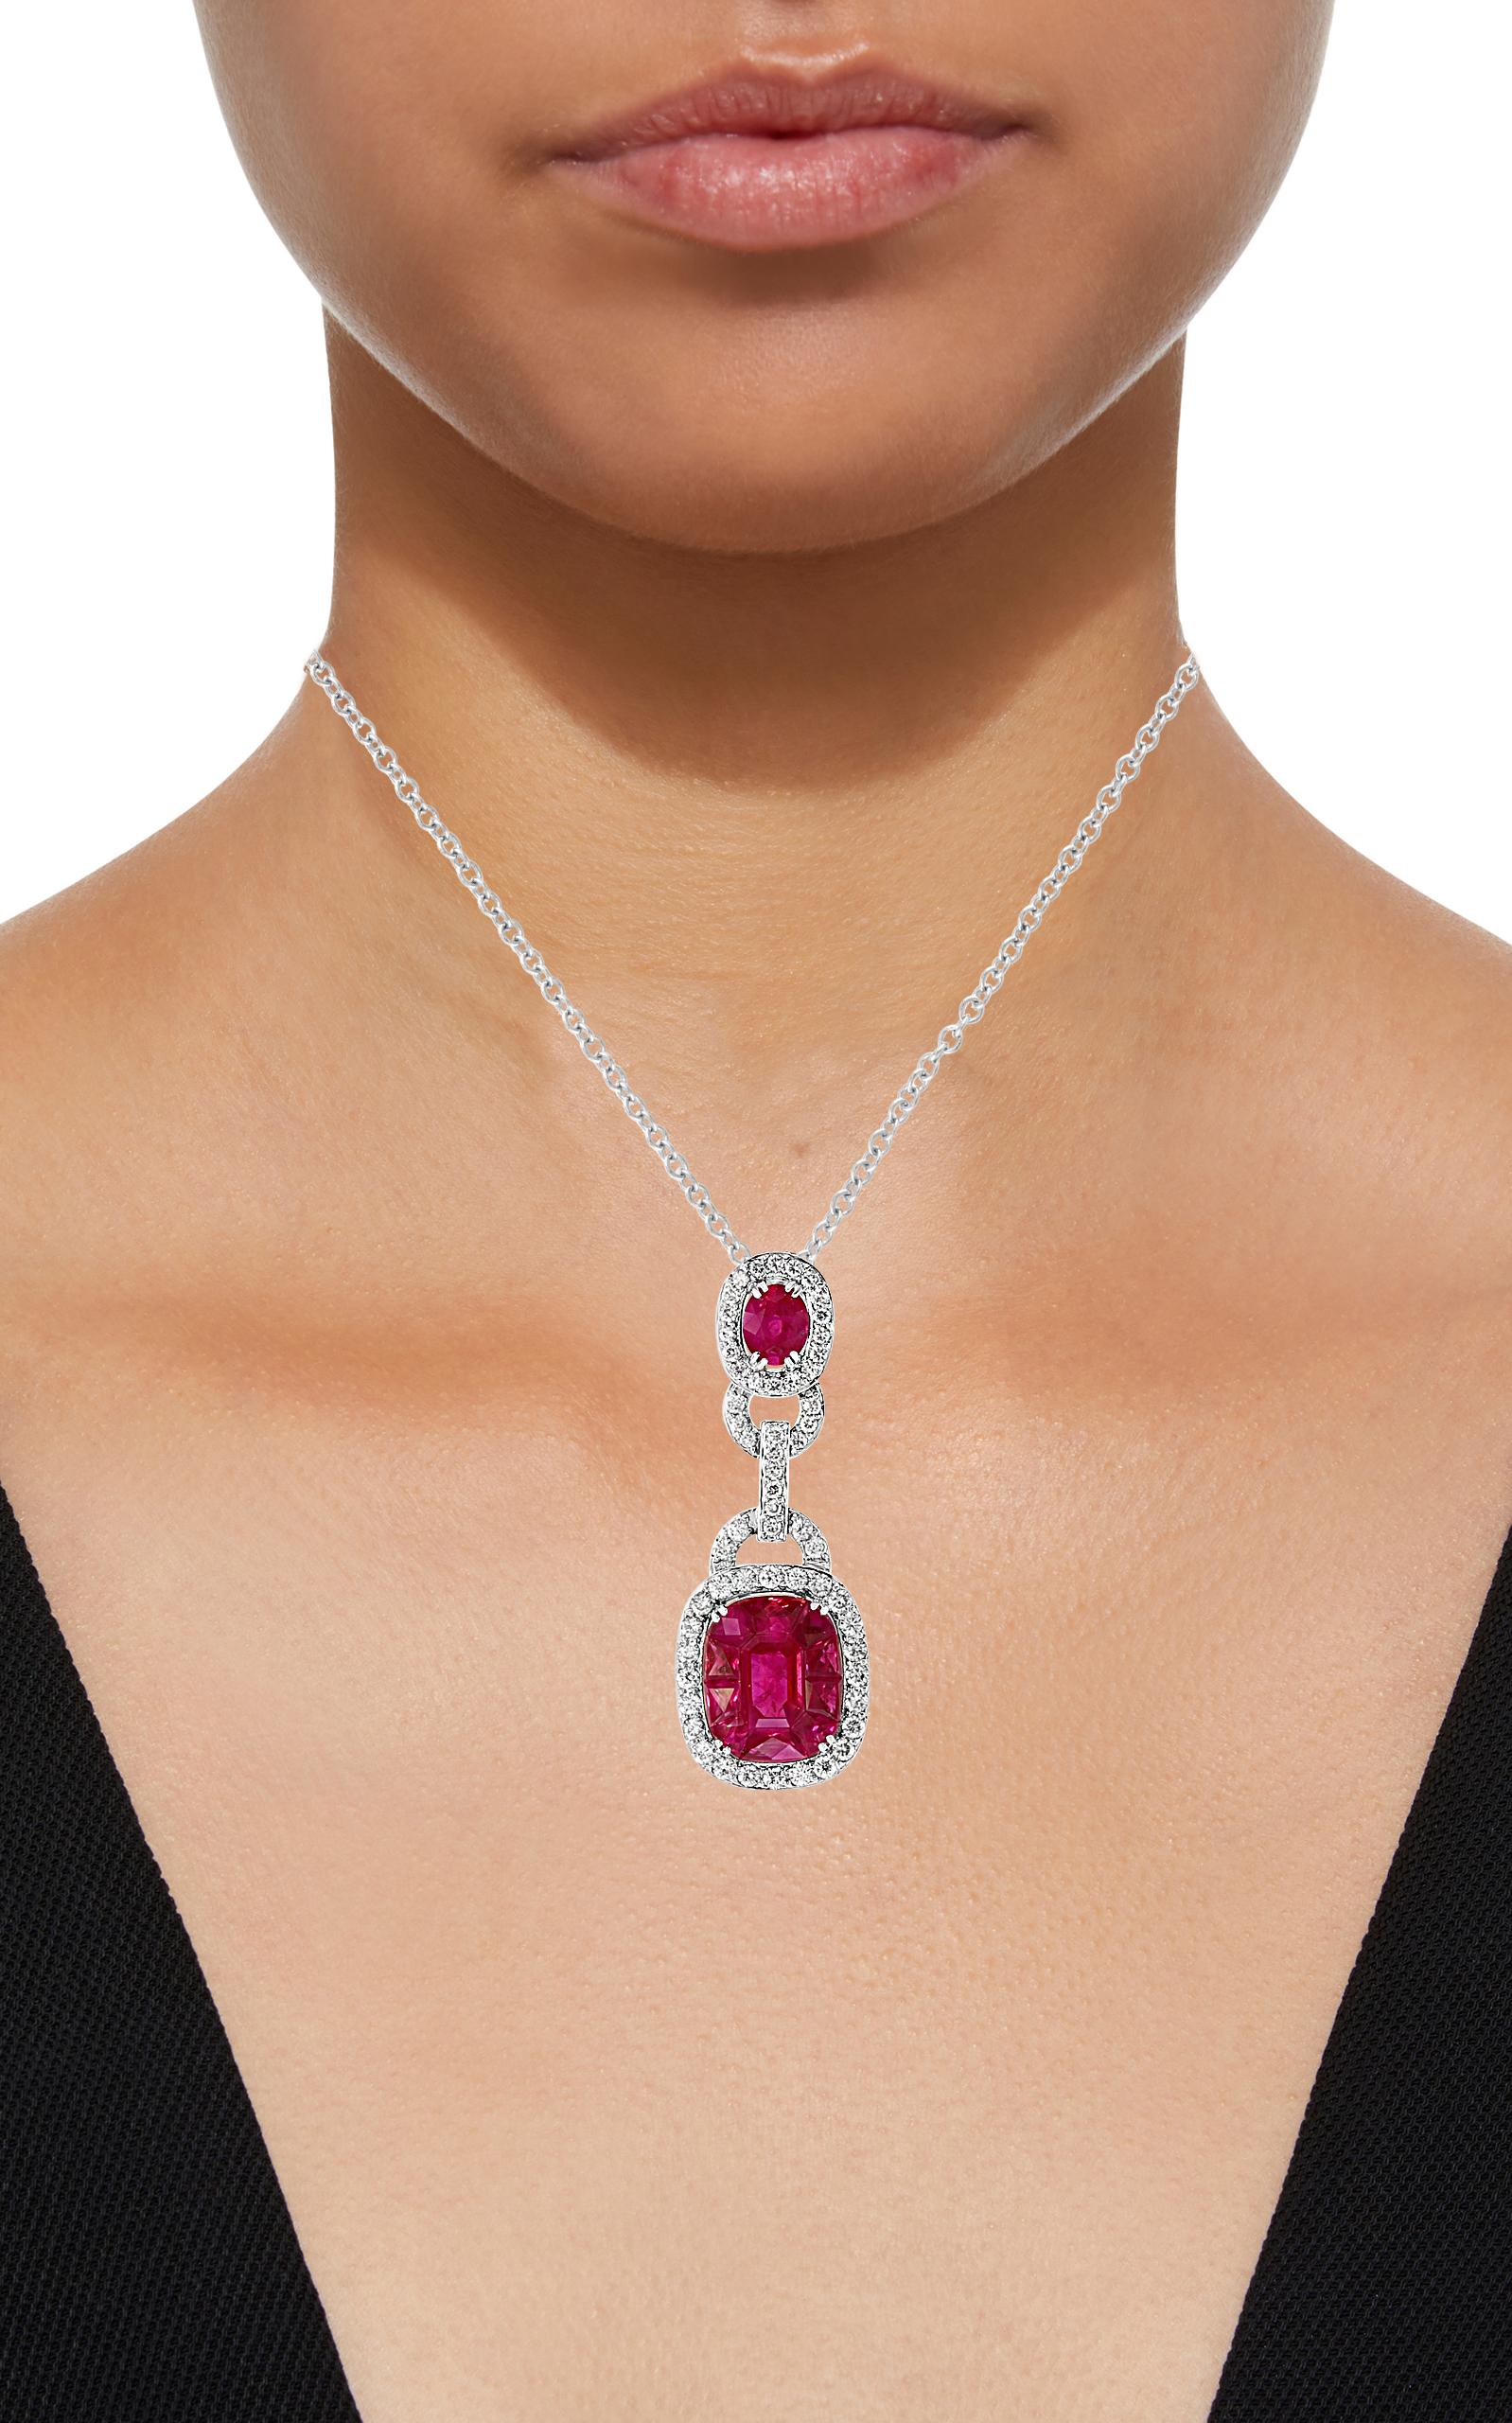 3.5 Carat Natural Burma Ruby and Diamond Pendant or Necklace in 18 Karat Gold For Sale 5